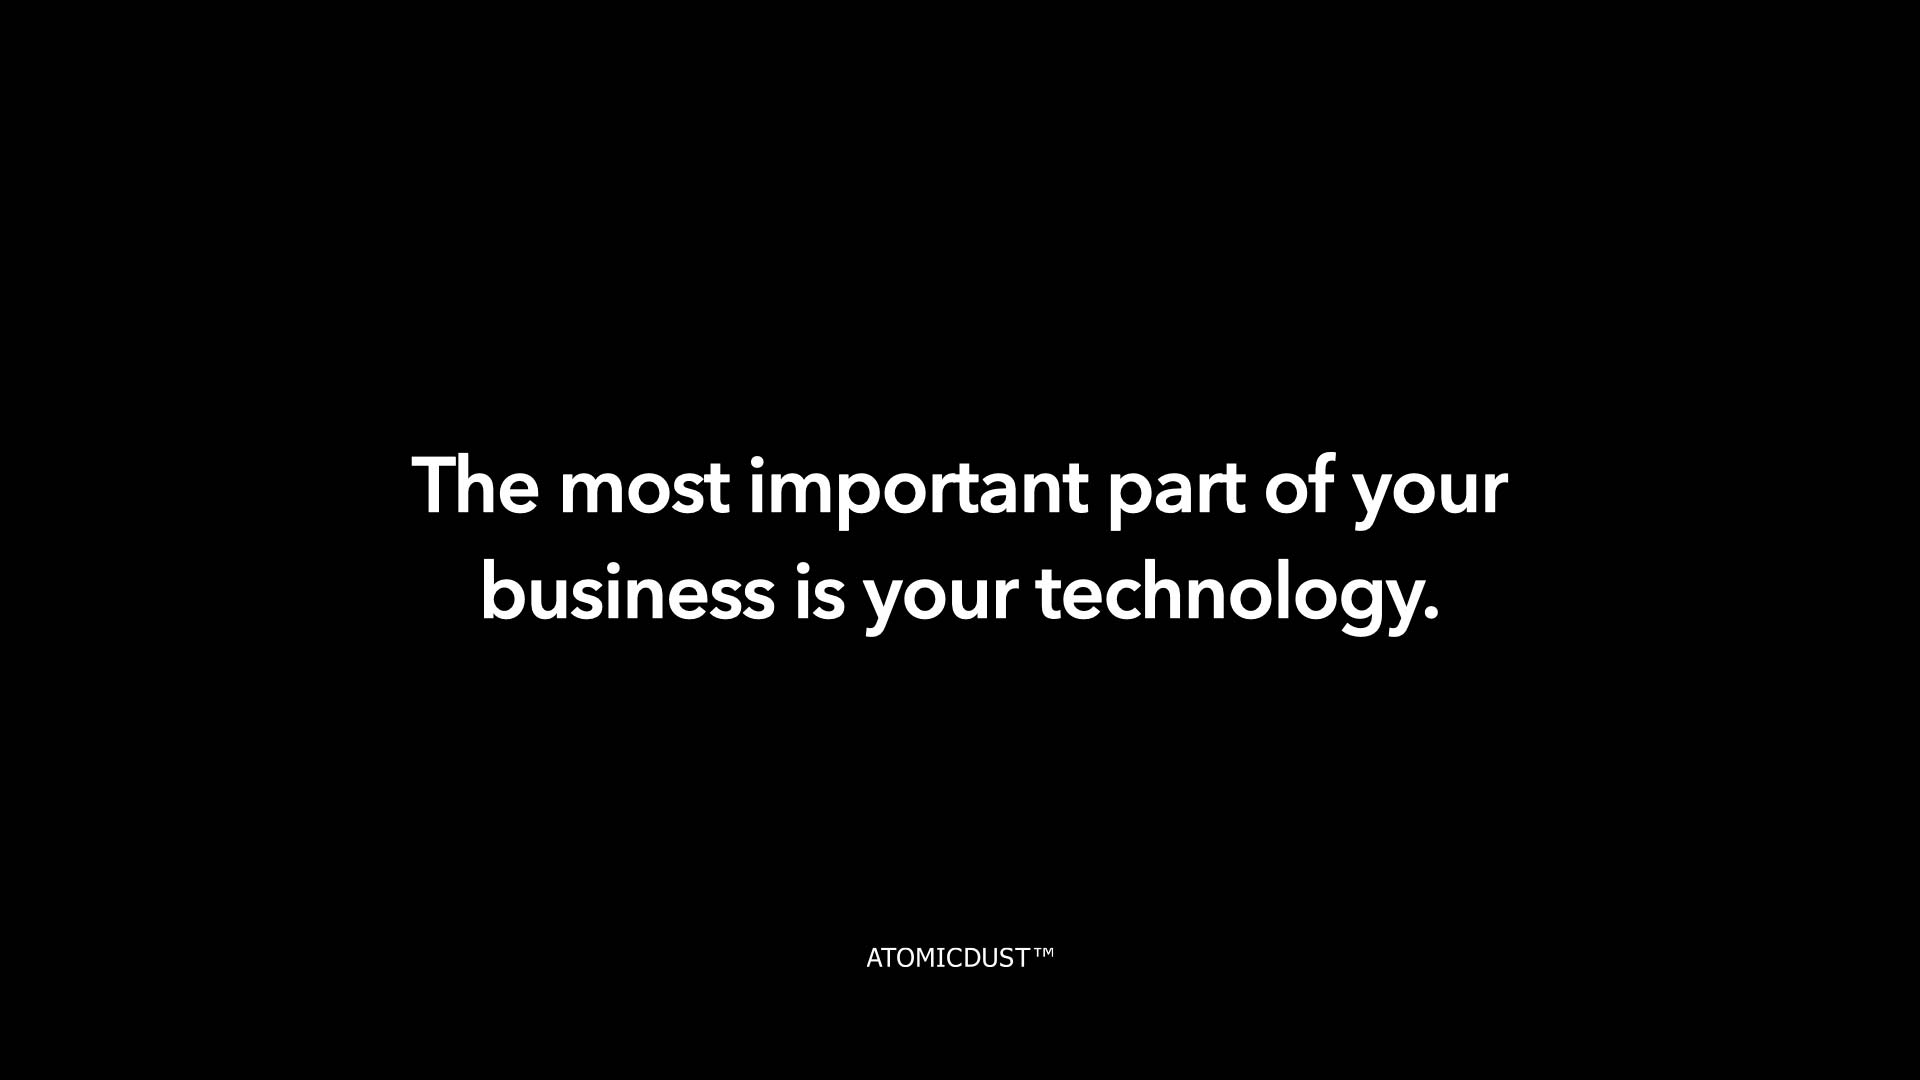 A black rectangle with white type that says "The most important part of your business is your technology."